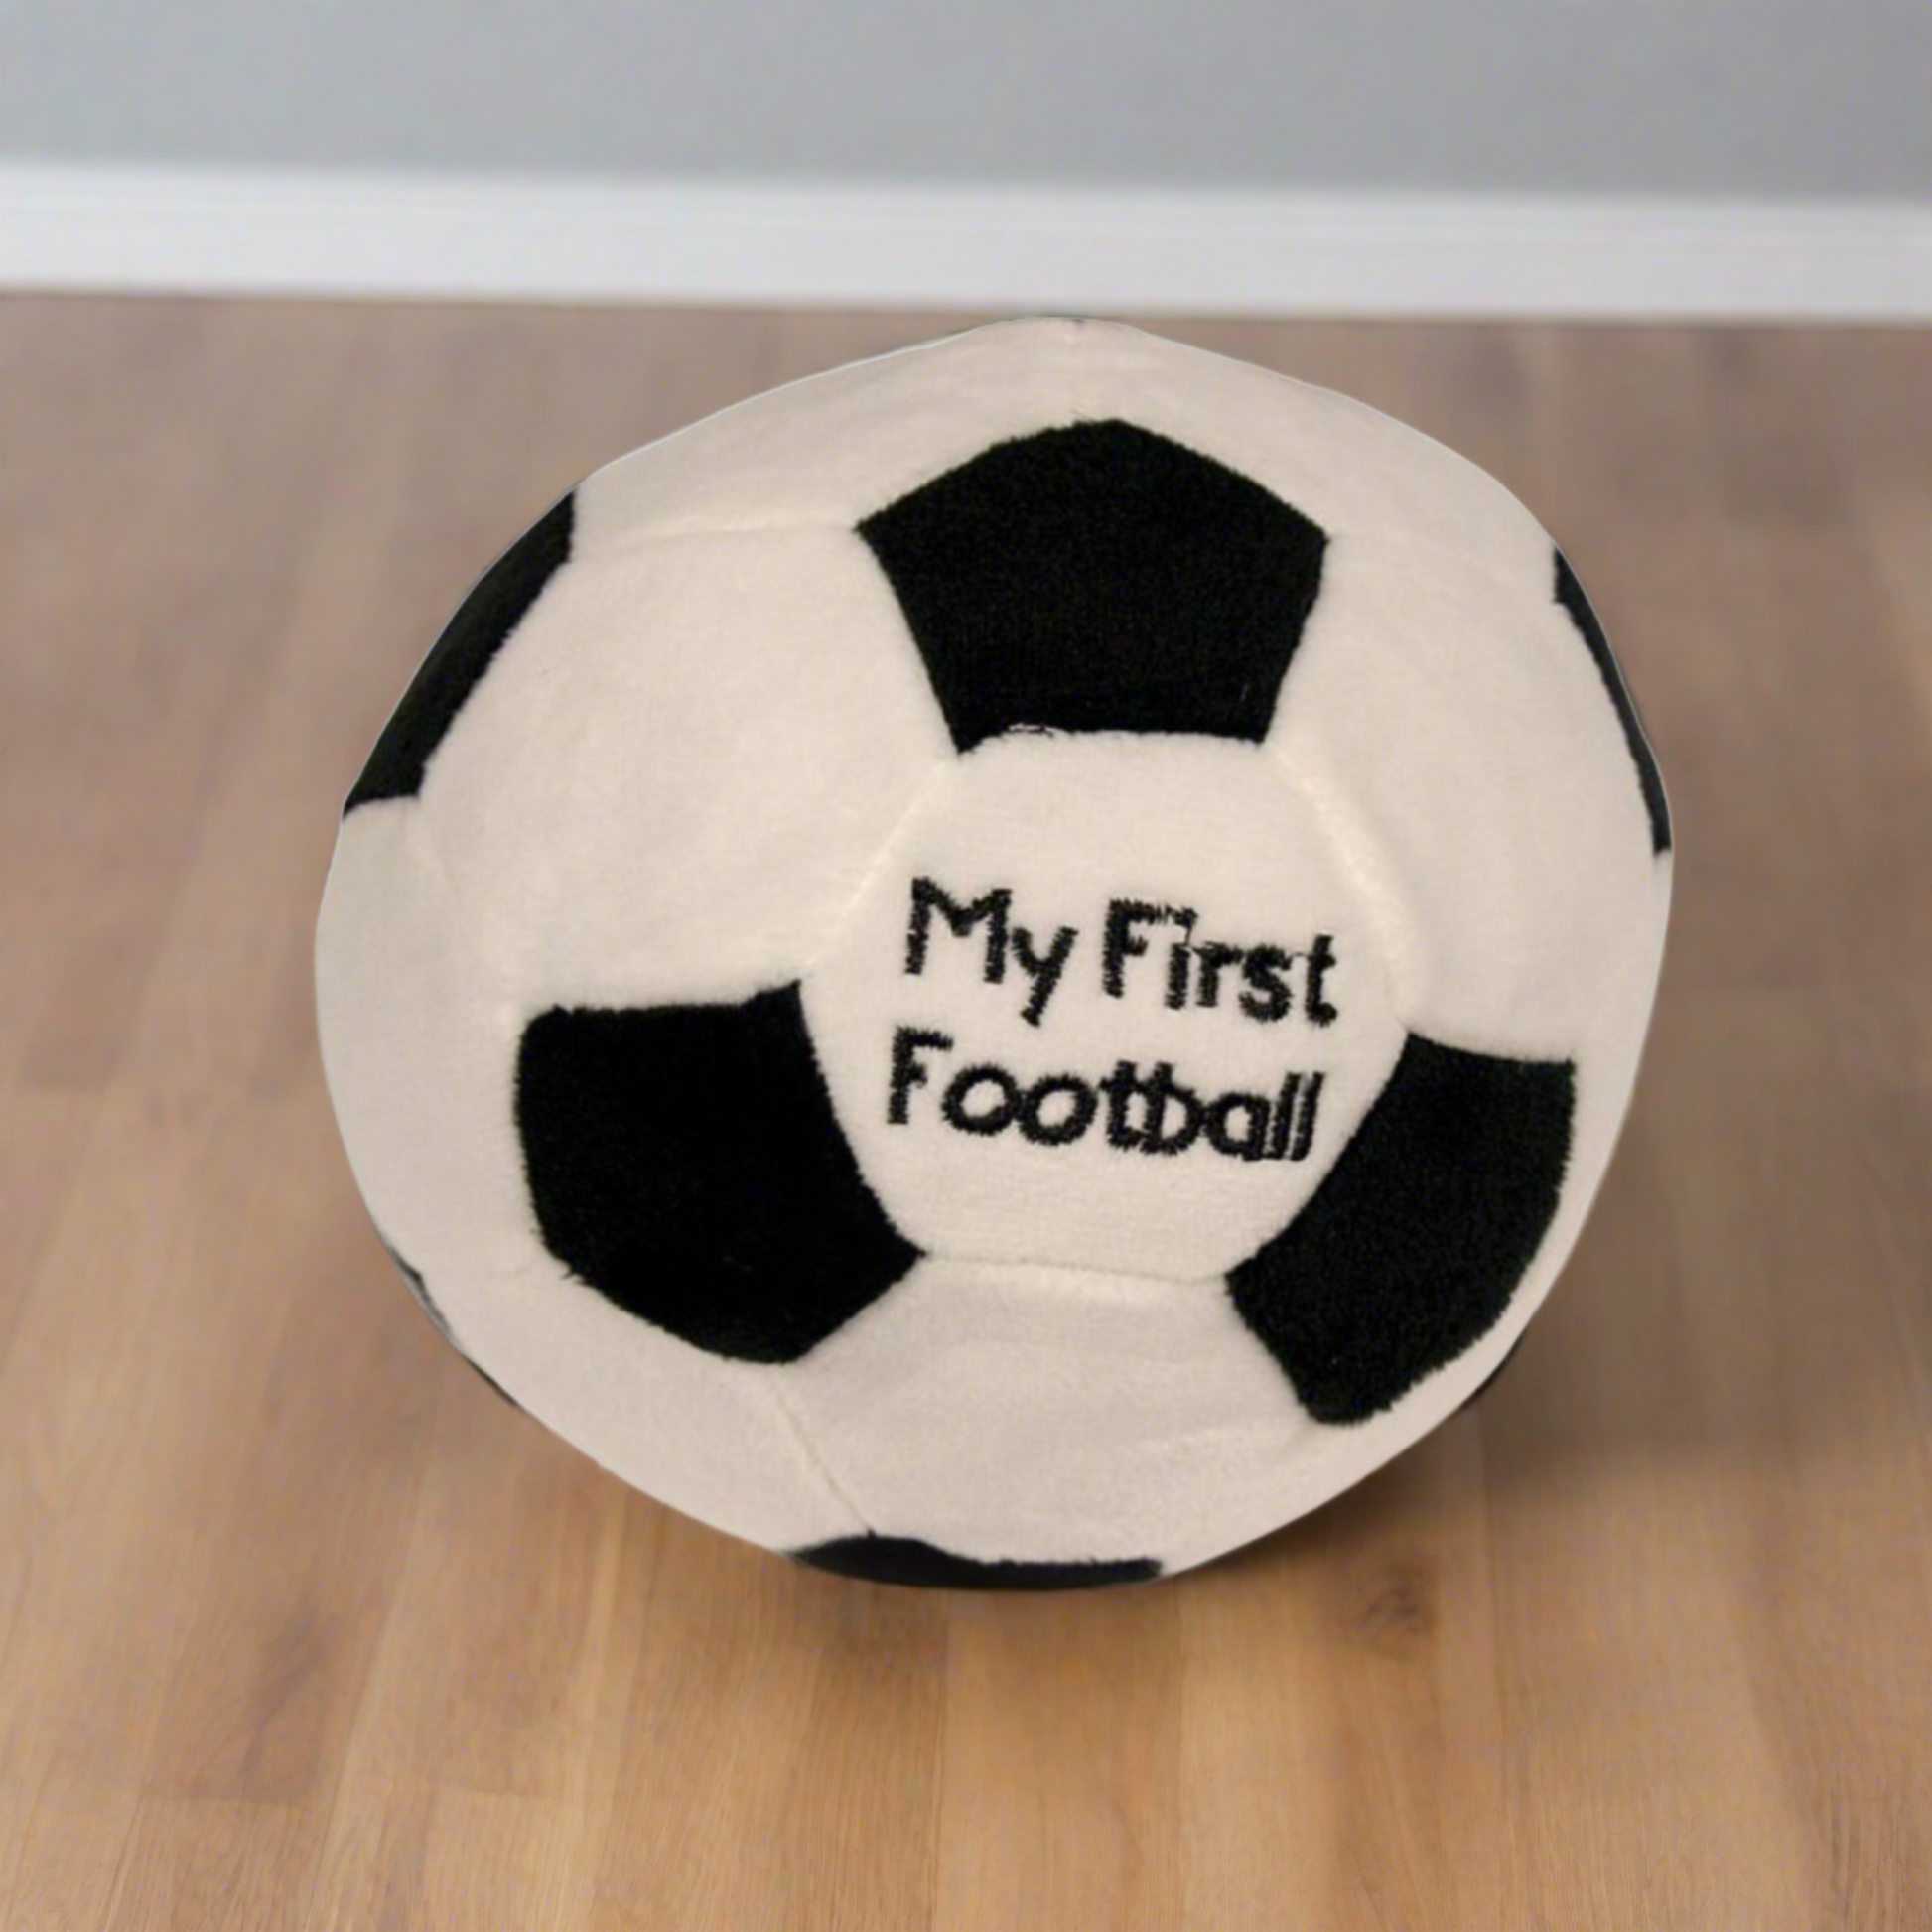 Soft baby toy, my first football. Measuring 15cm made from soft plush materials with a rattle sound within. (front angle)